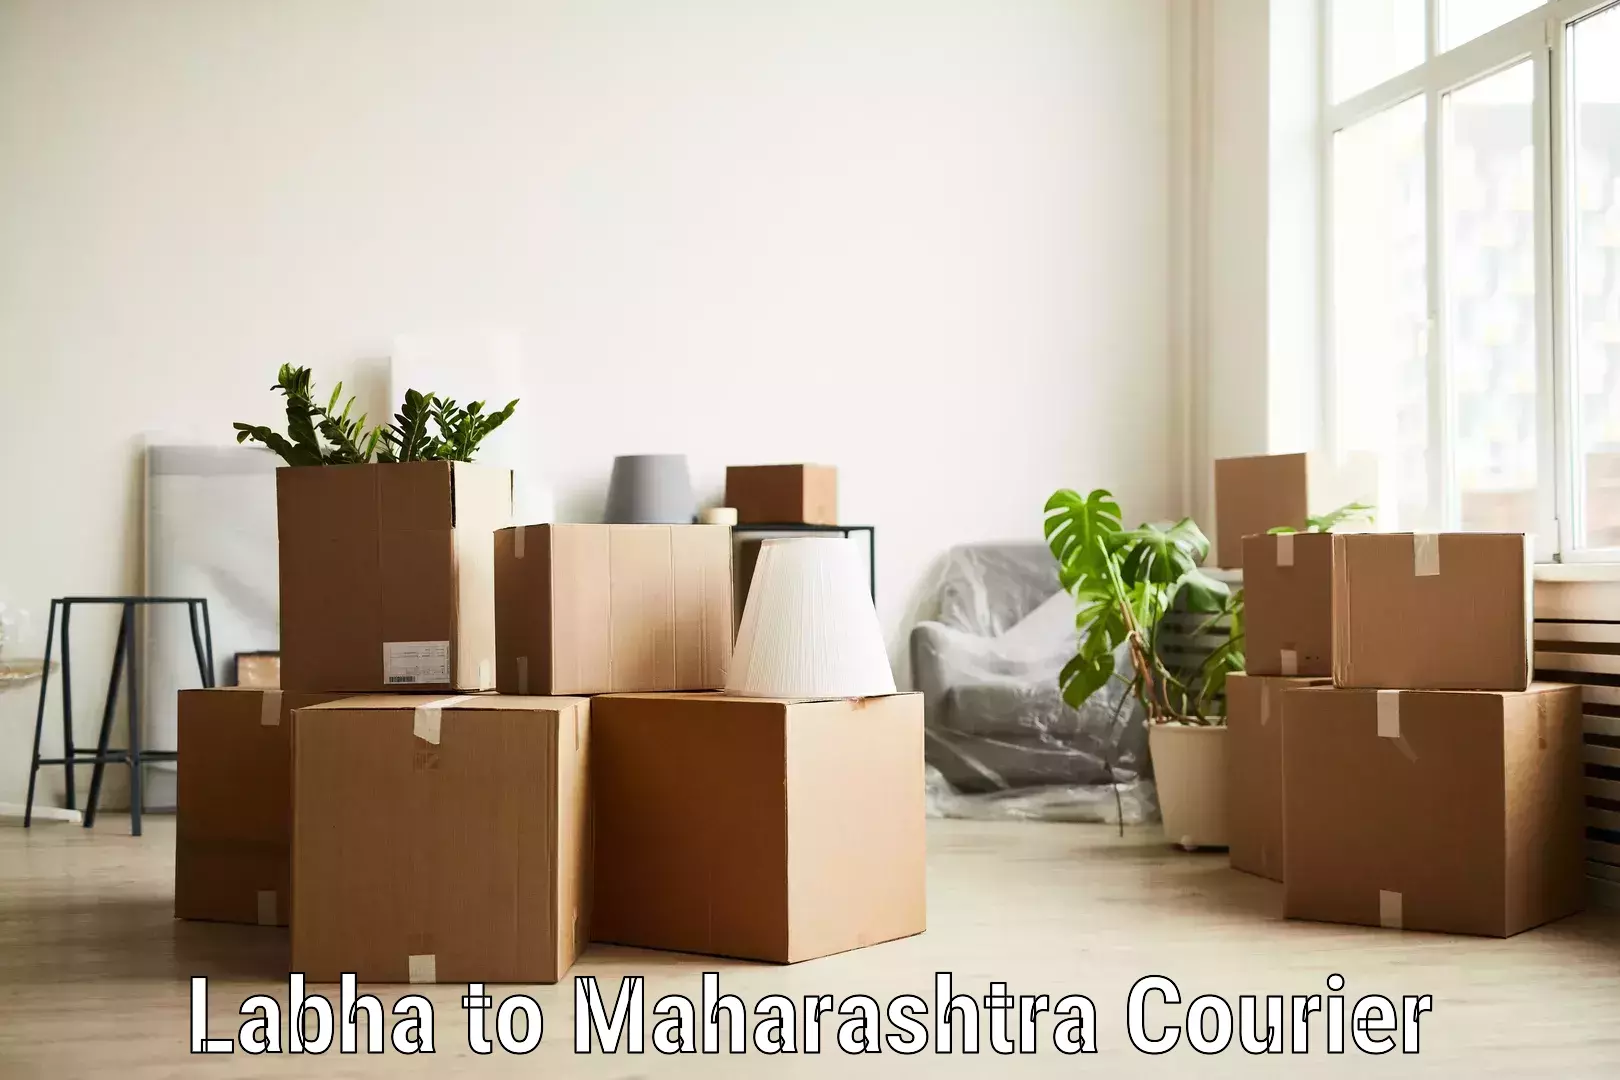 State-of-the-art courier technology Labha to NIT Nagpur